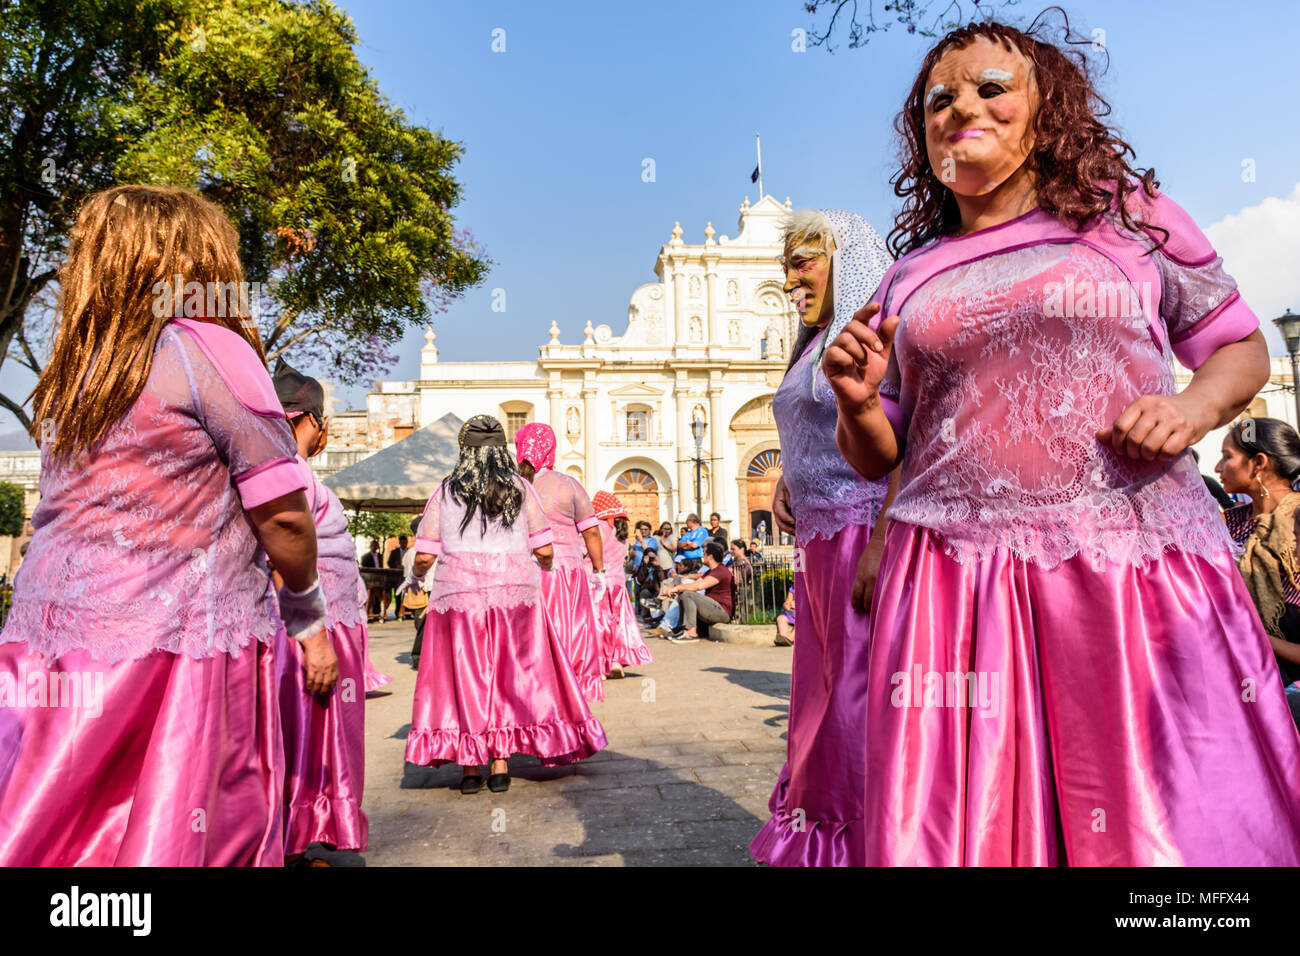 Antigua, Guatemala -  March 9, 2018: Dance of the grannies (Baile de las Abuelitas) a traditional folk dance in central plaza in front of cathedral Stock Photo